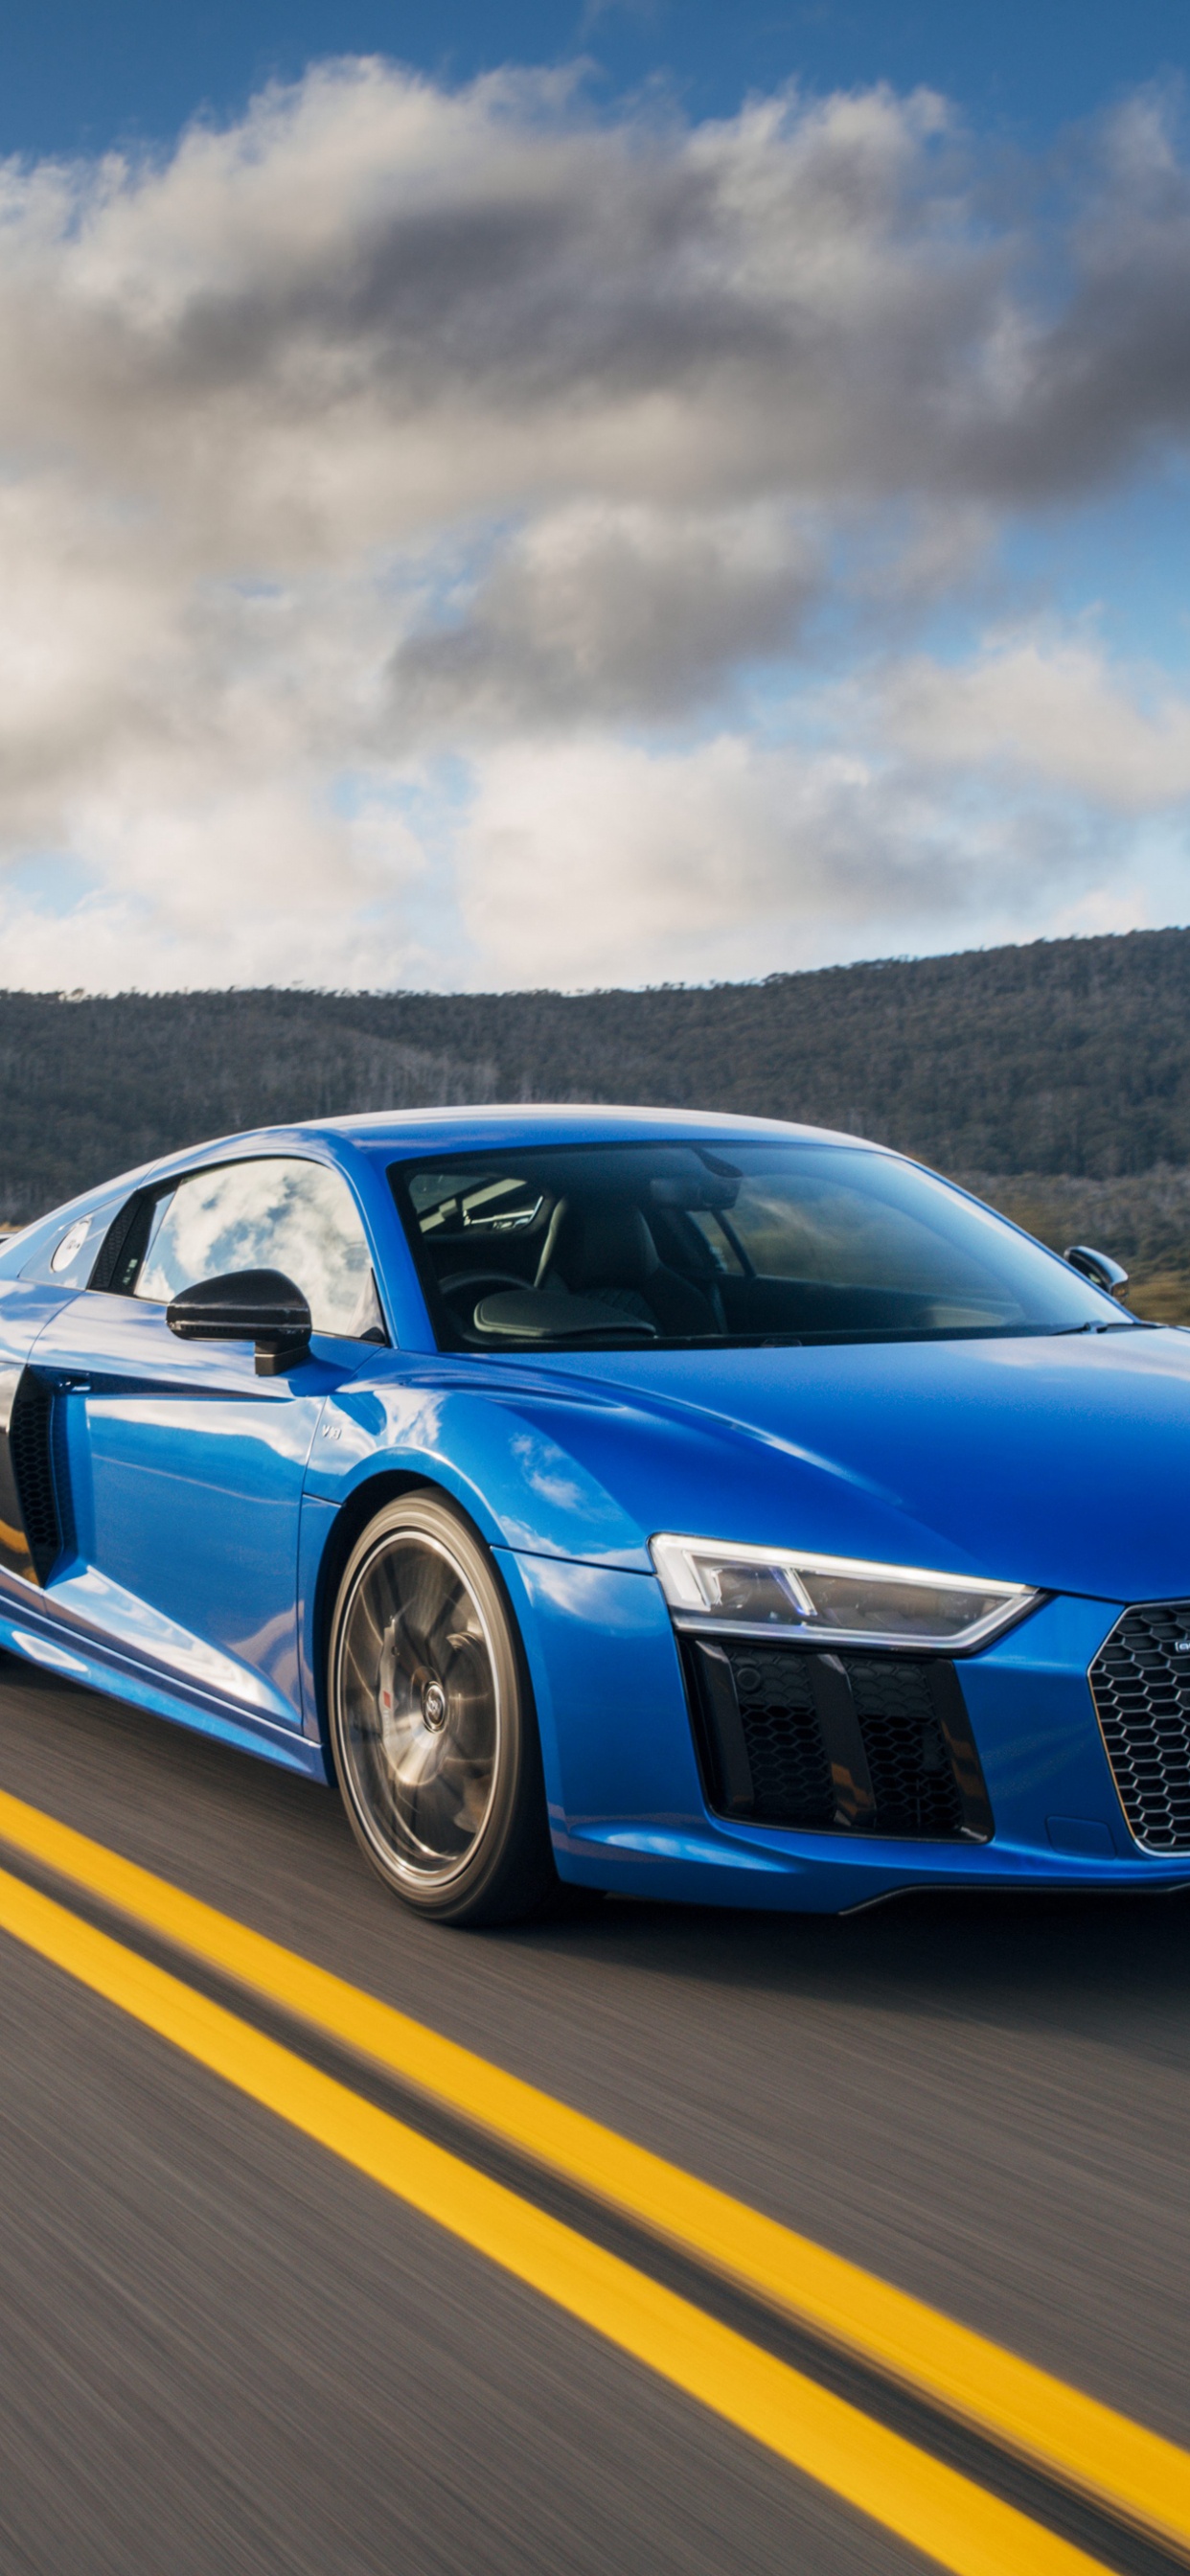 Blue Audi Coupe on Road During Daytime. Wallpaper in 1242x2688 Resolution